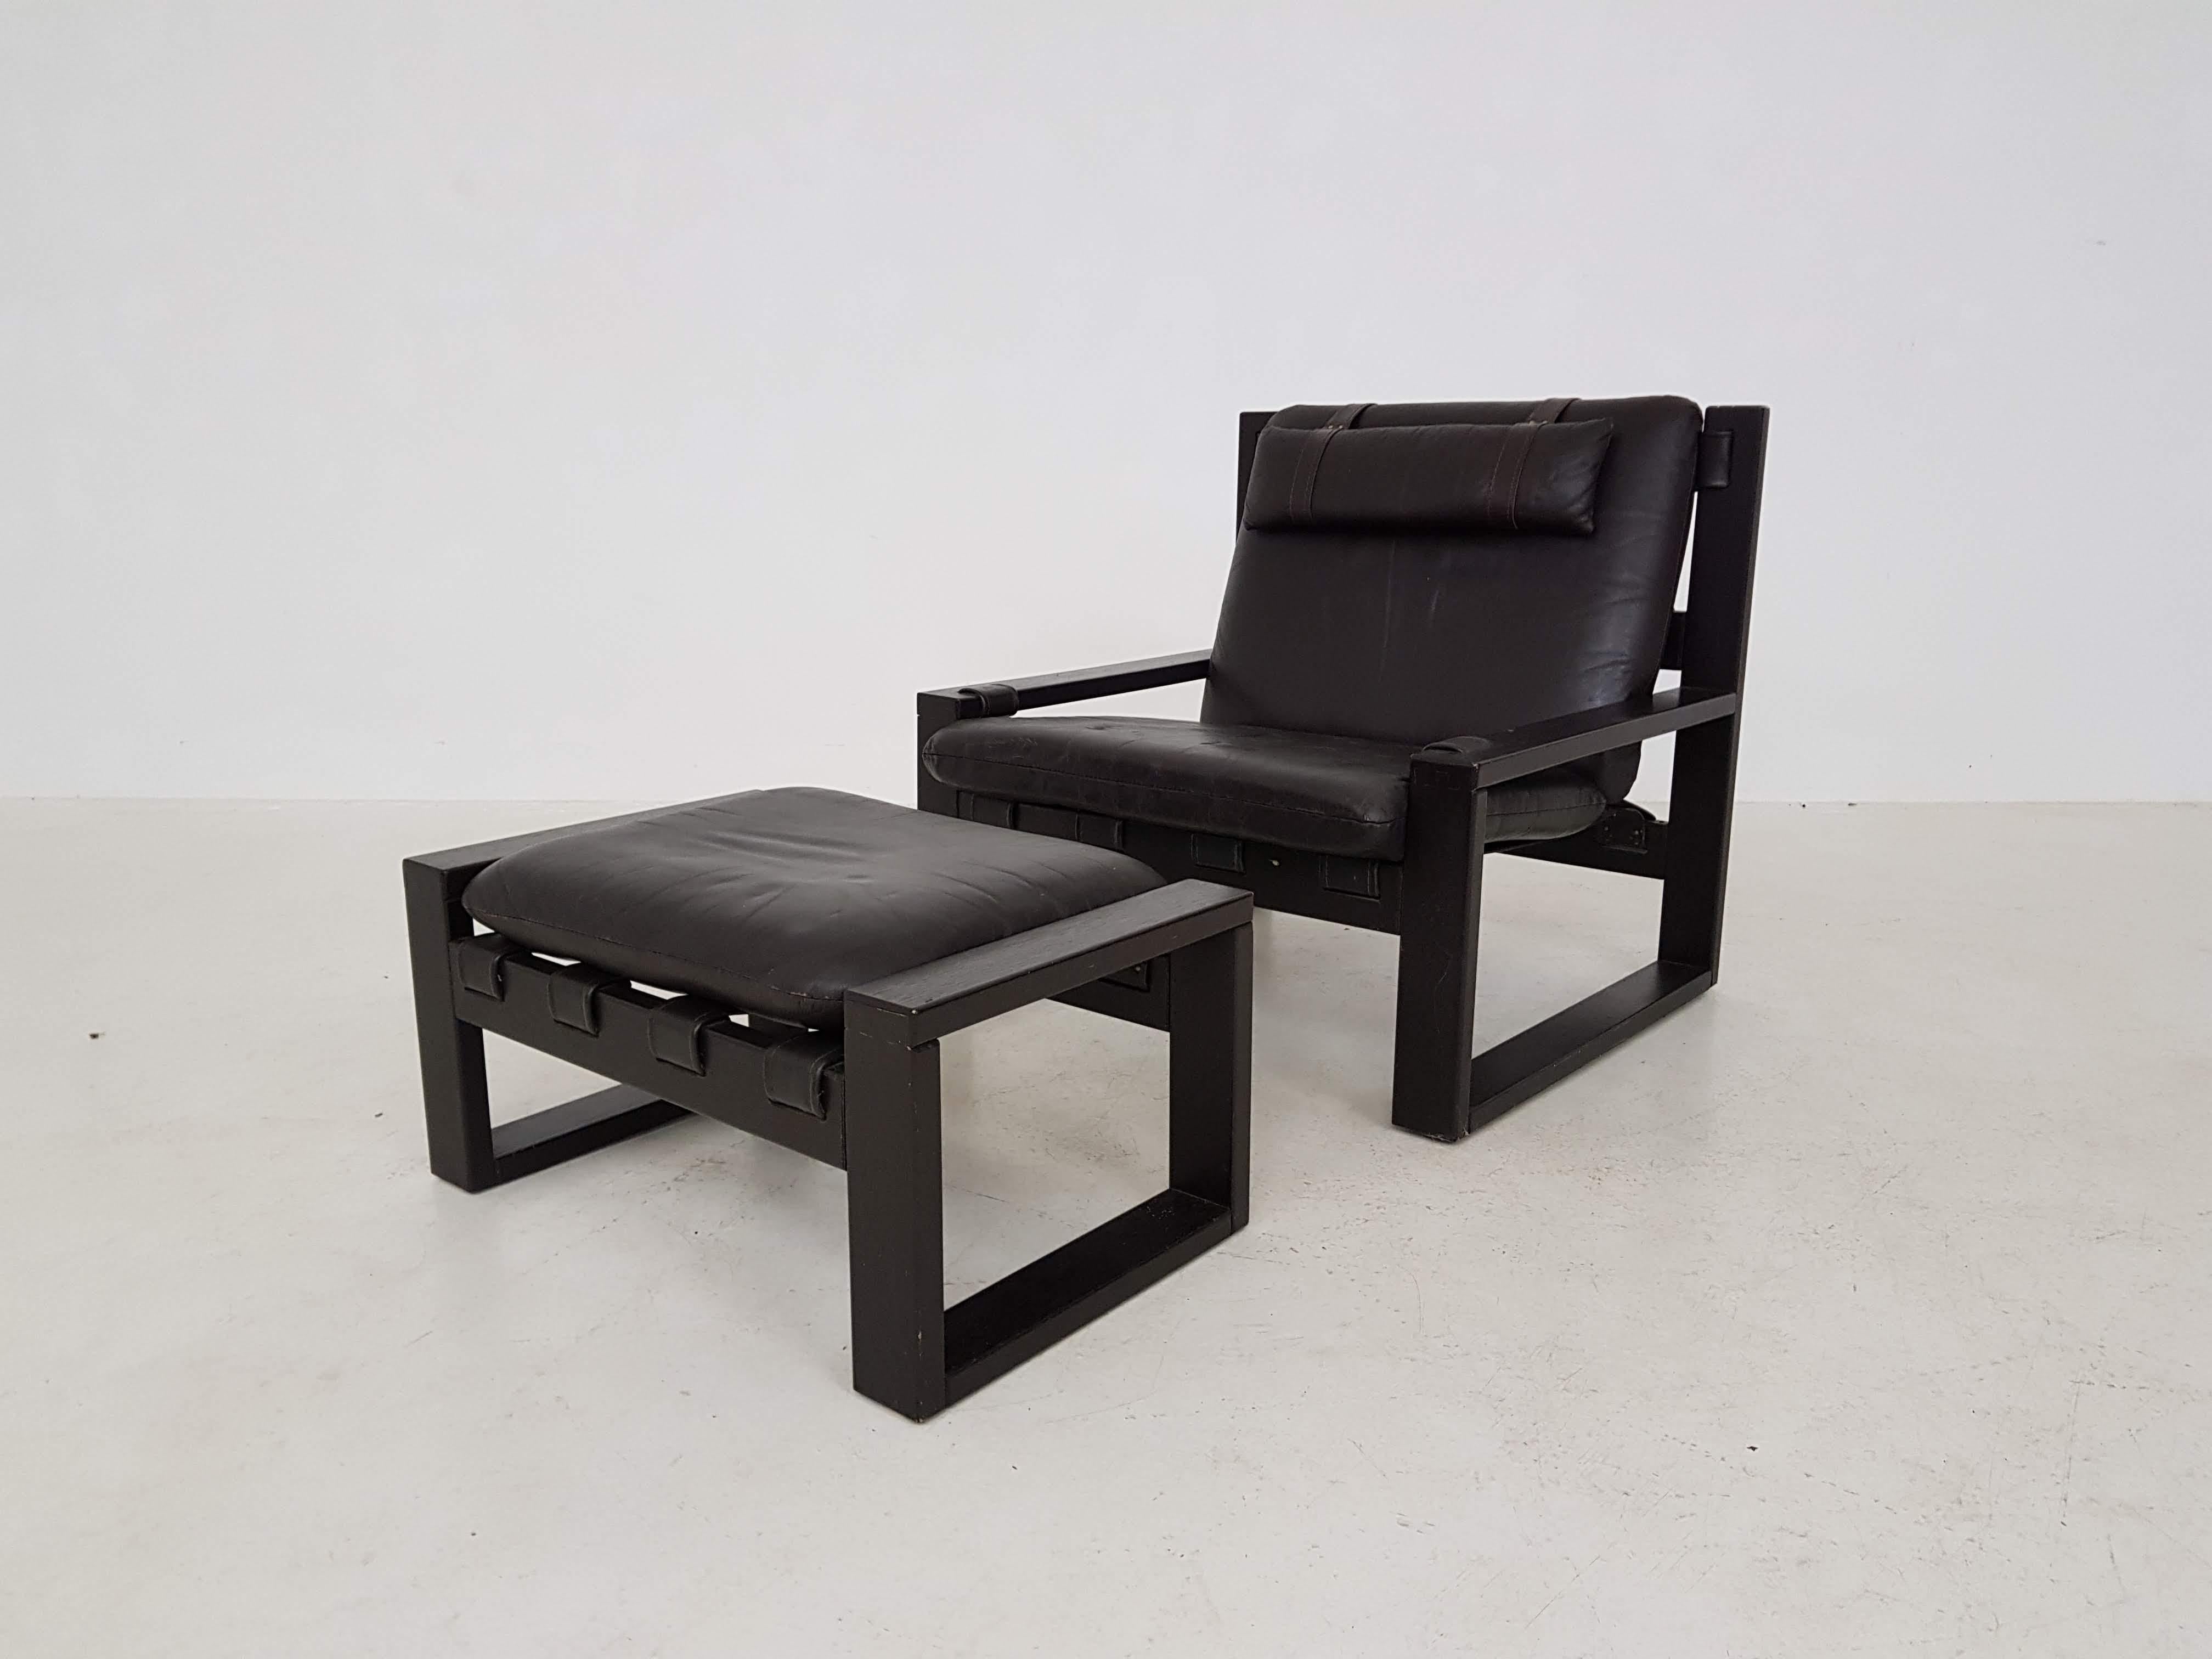 Brutalist lounge chair and ottoman by Sonja Wasseur, Dutch design, 1970s

Beautiful chair and ottoman by Dutch designer Sonja Wasseur. The chair has a black painted oak frame and high quality leather cushions. The cushions have nice original